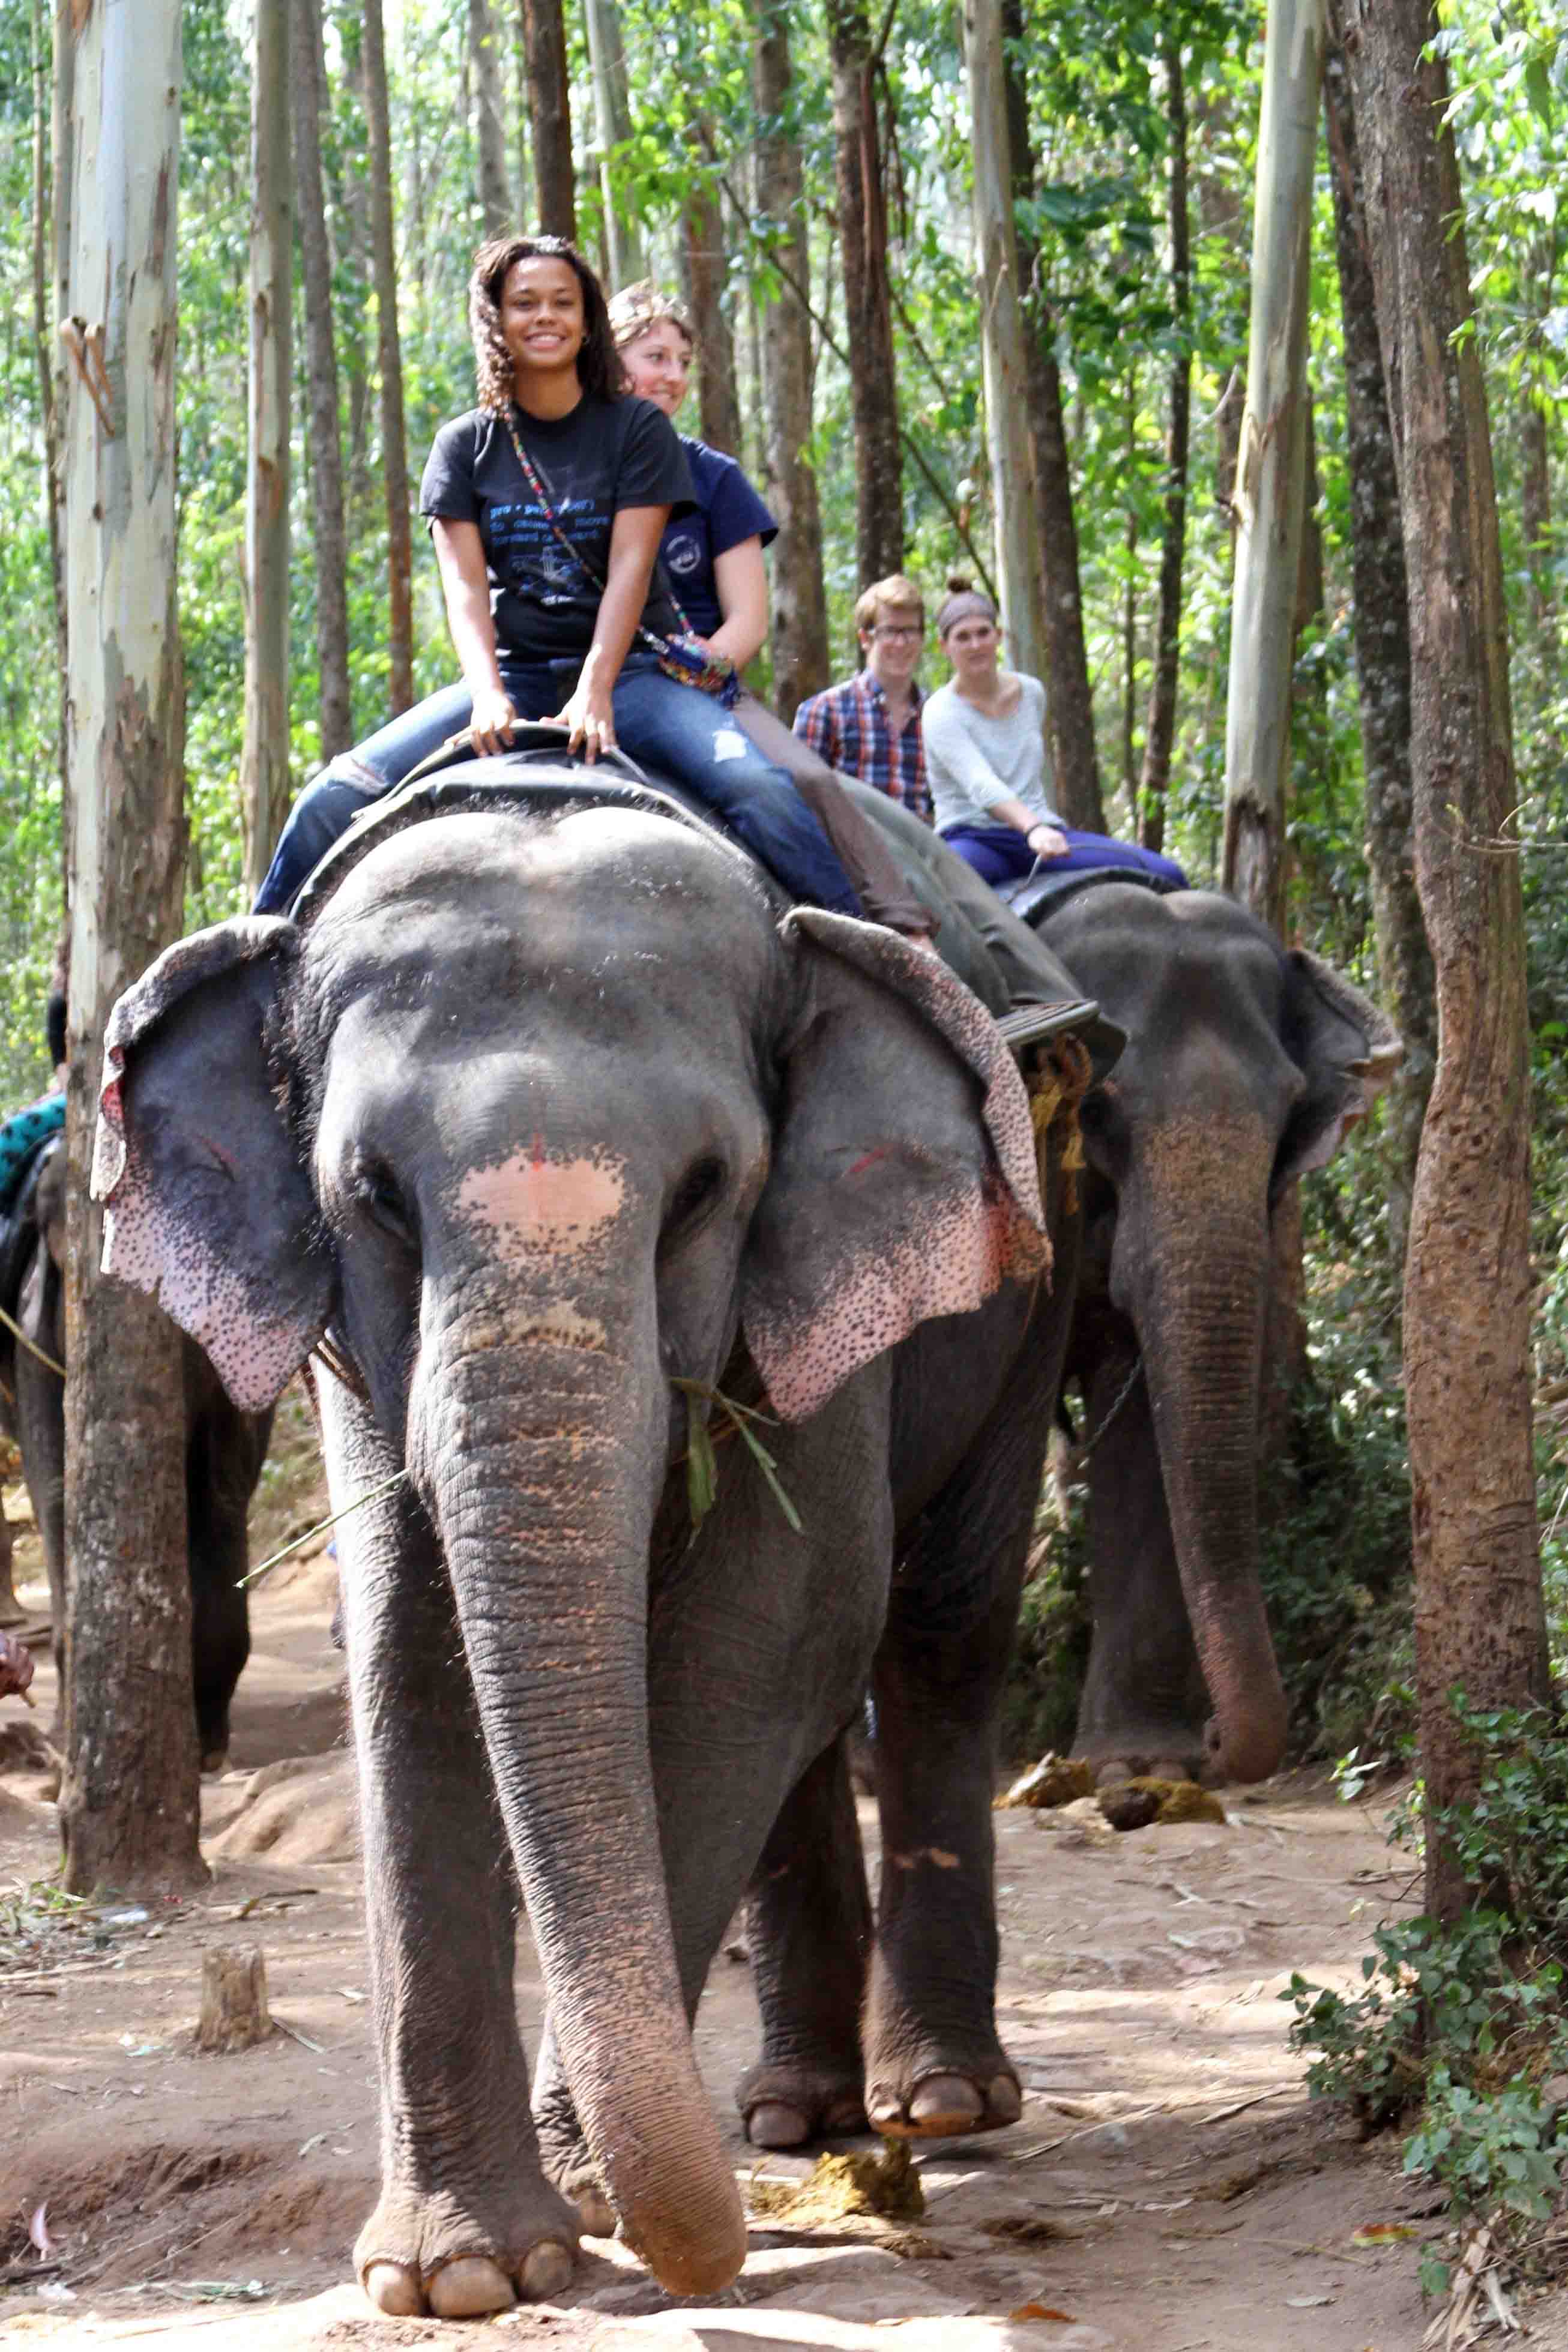 Students riding an elephant in Bengaluru, India.